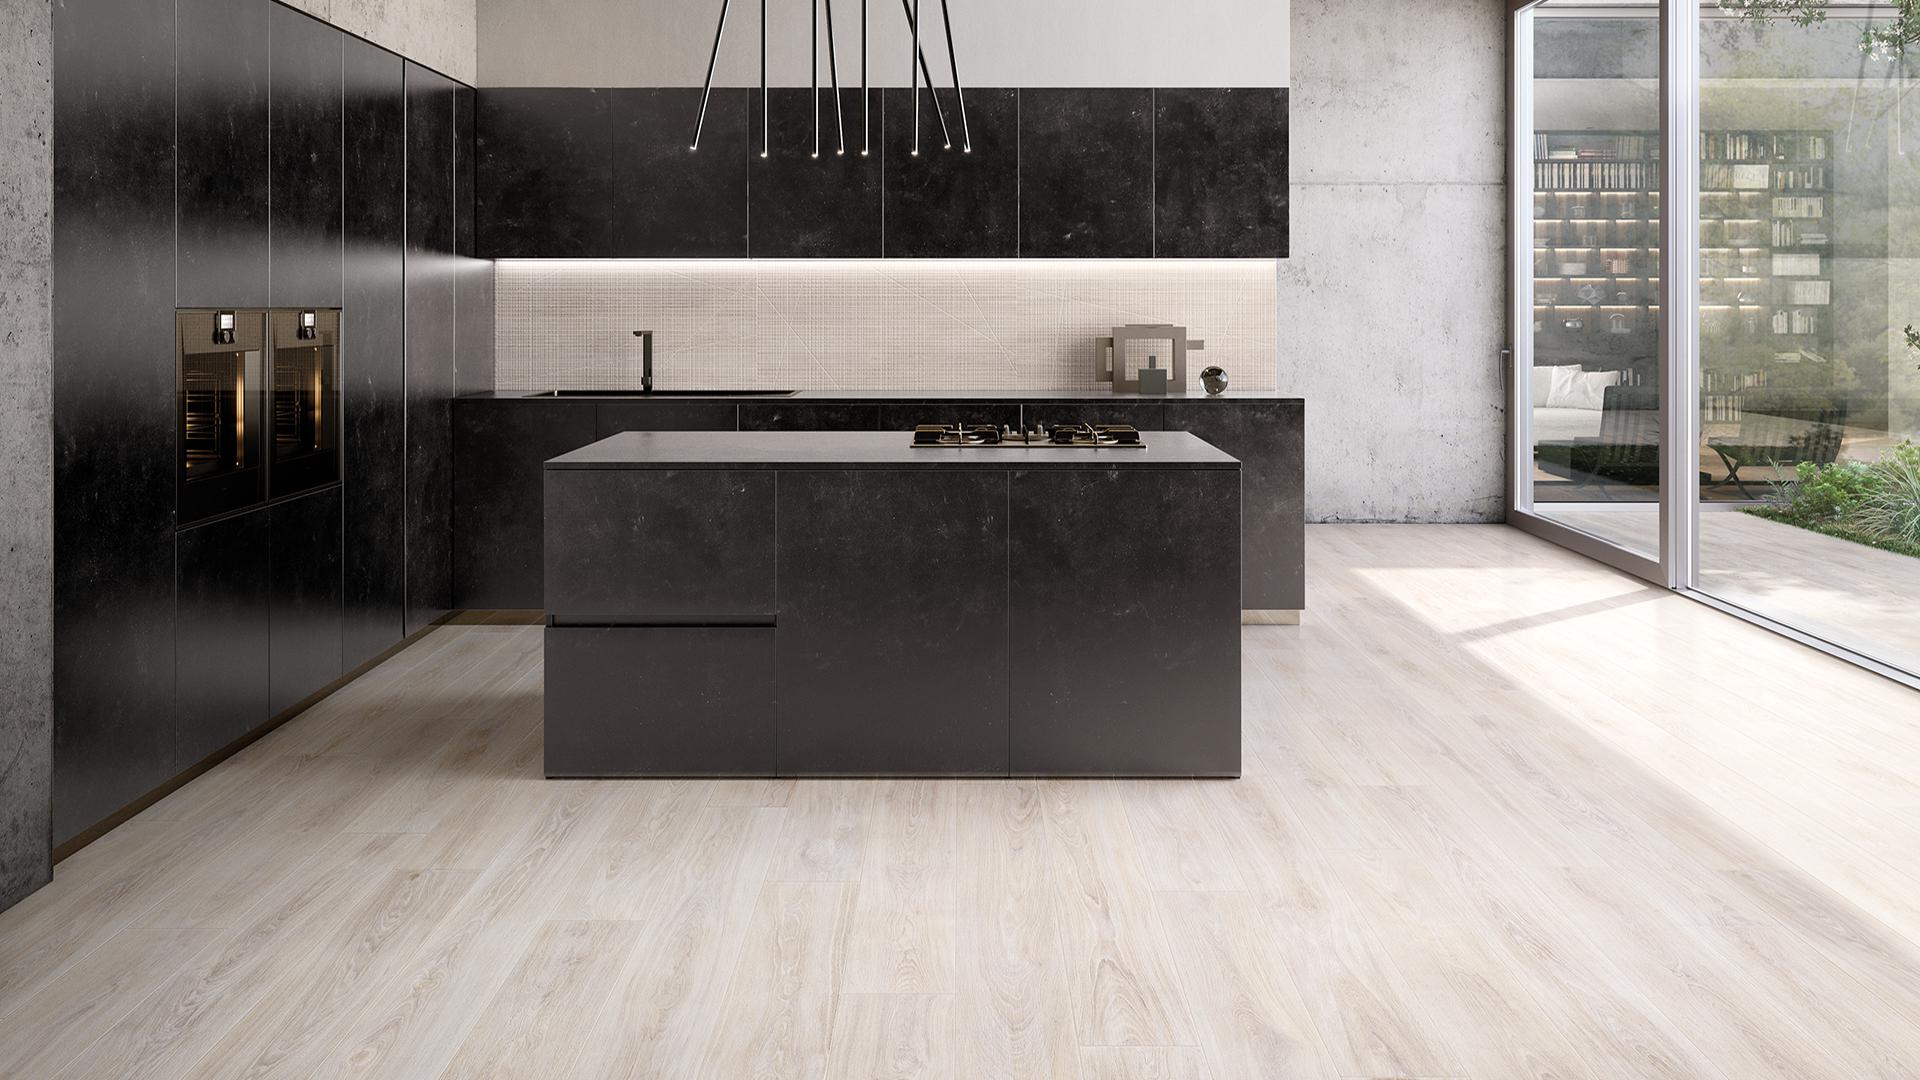 Emil Ergon Woodtouch Italian porcelain tile collection in a modern kitchen with light wood effect flooring, dark matte island, and black wall panels.